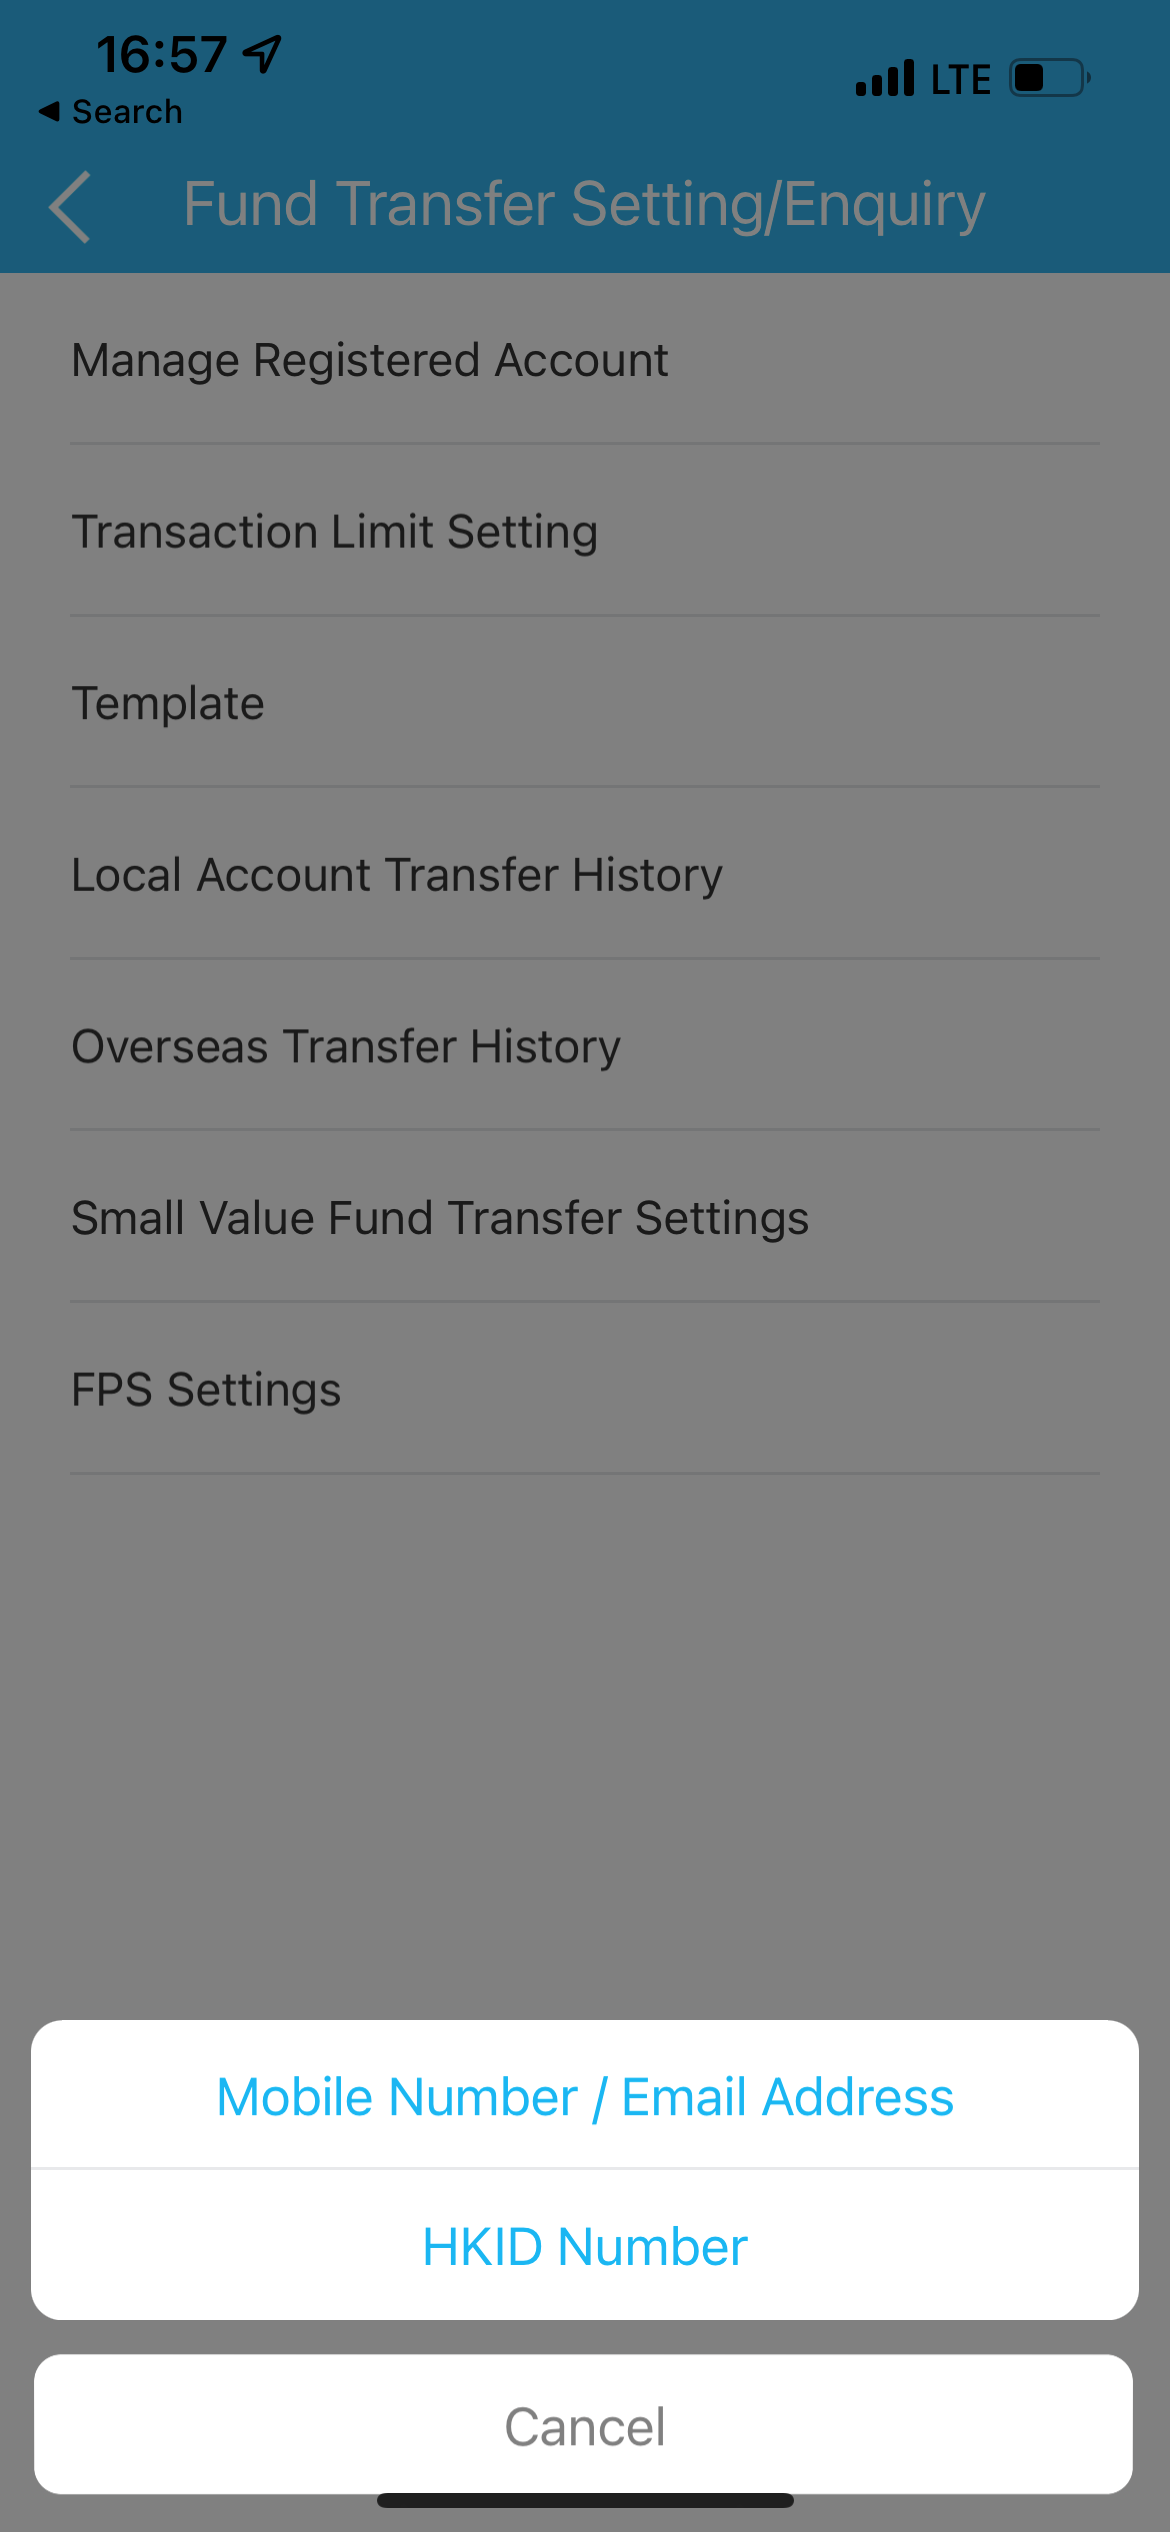 step 2, Tap on “FPS Settings” , then tap on “HKID Number”